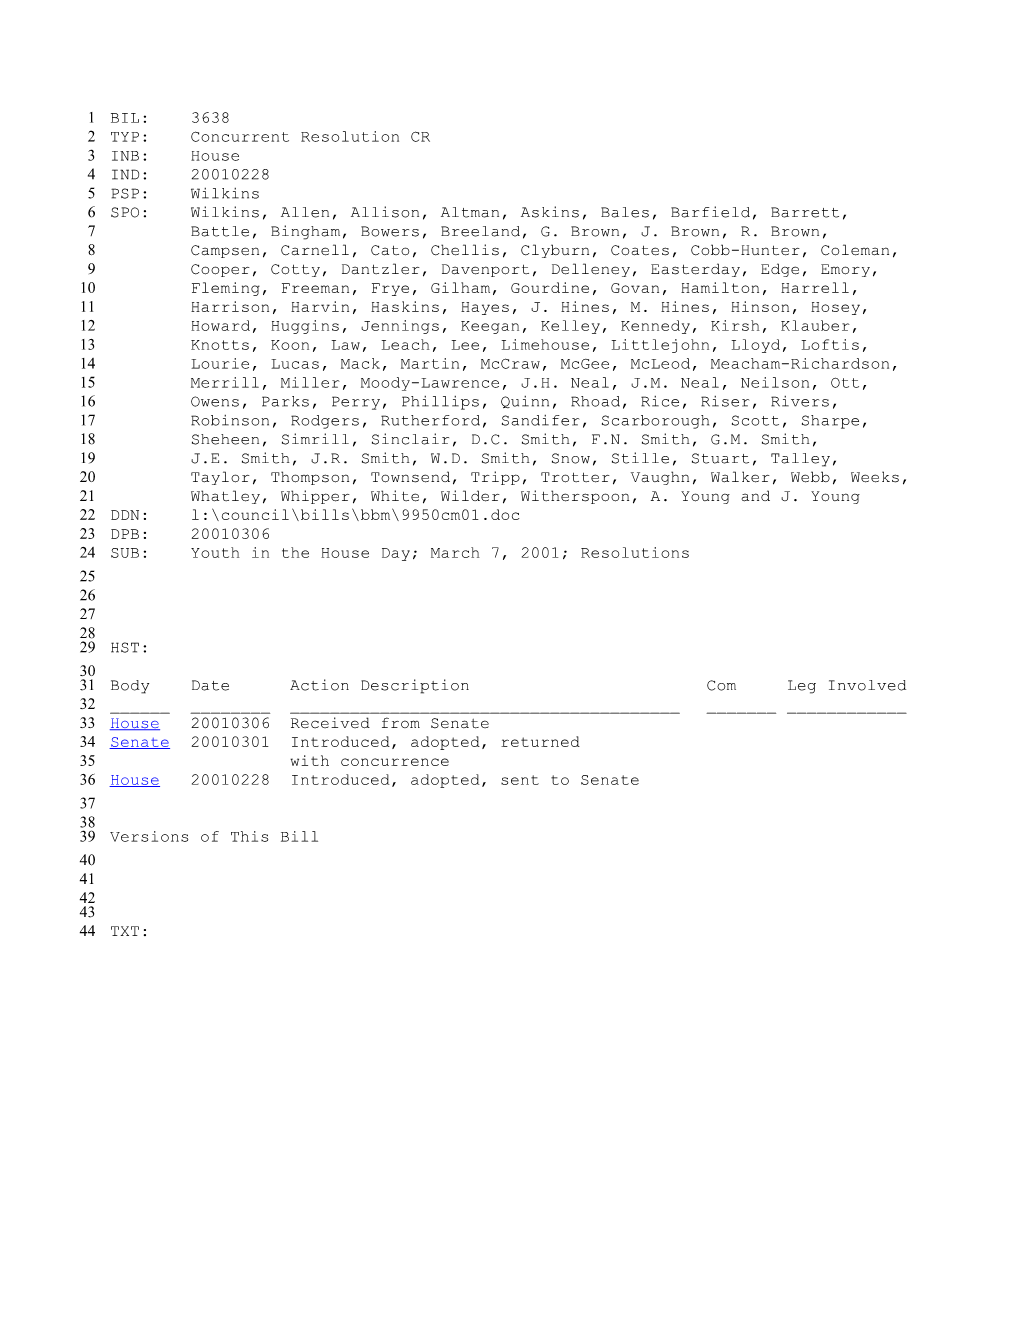 2001-2002 Bill 3638: Youth in the House Day; March 7, 2001; Resolutions - South Carolina